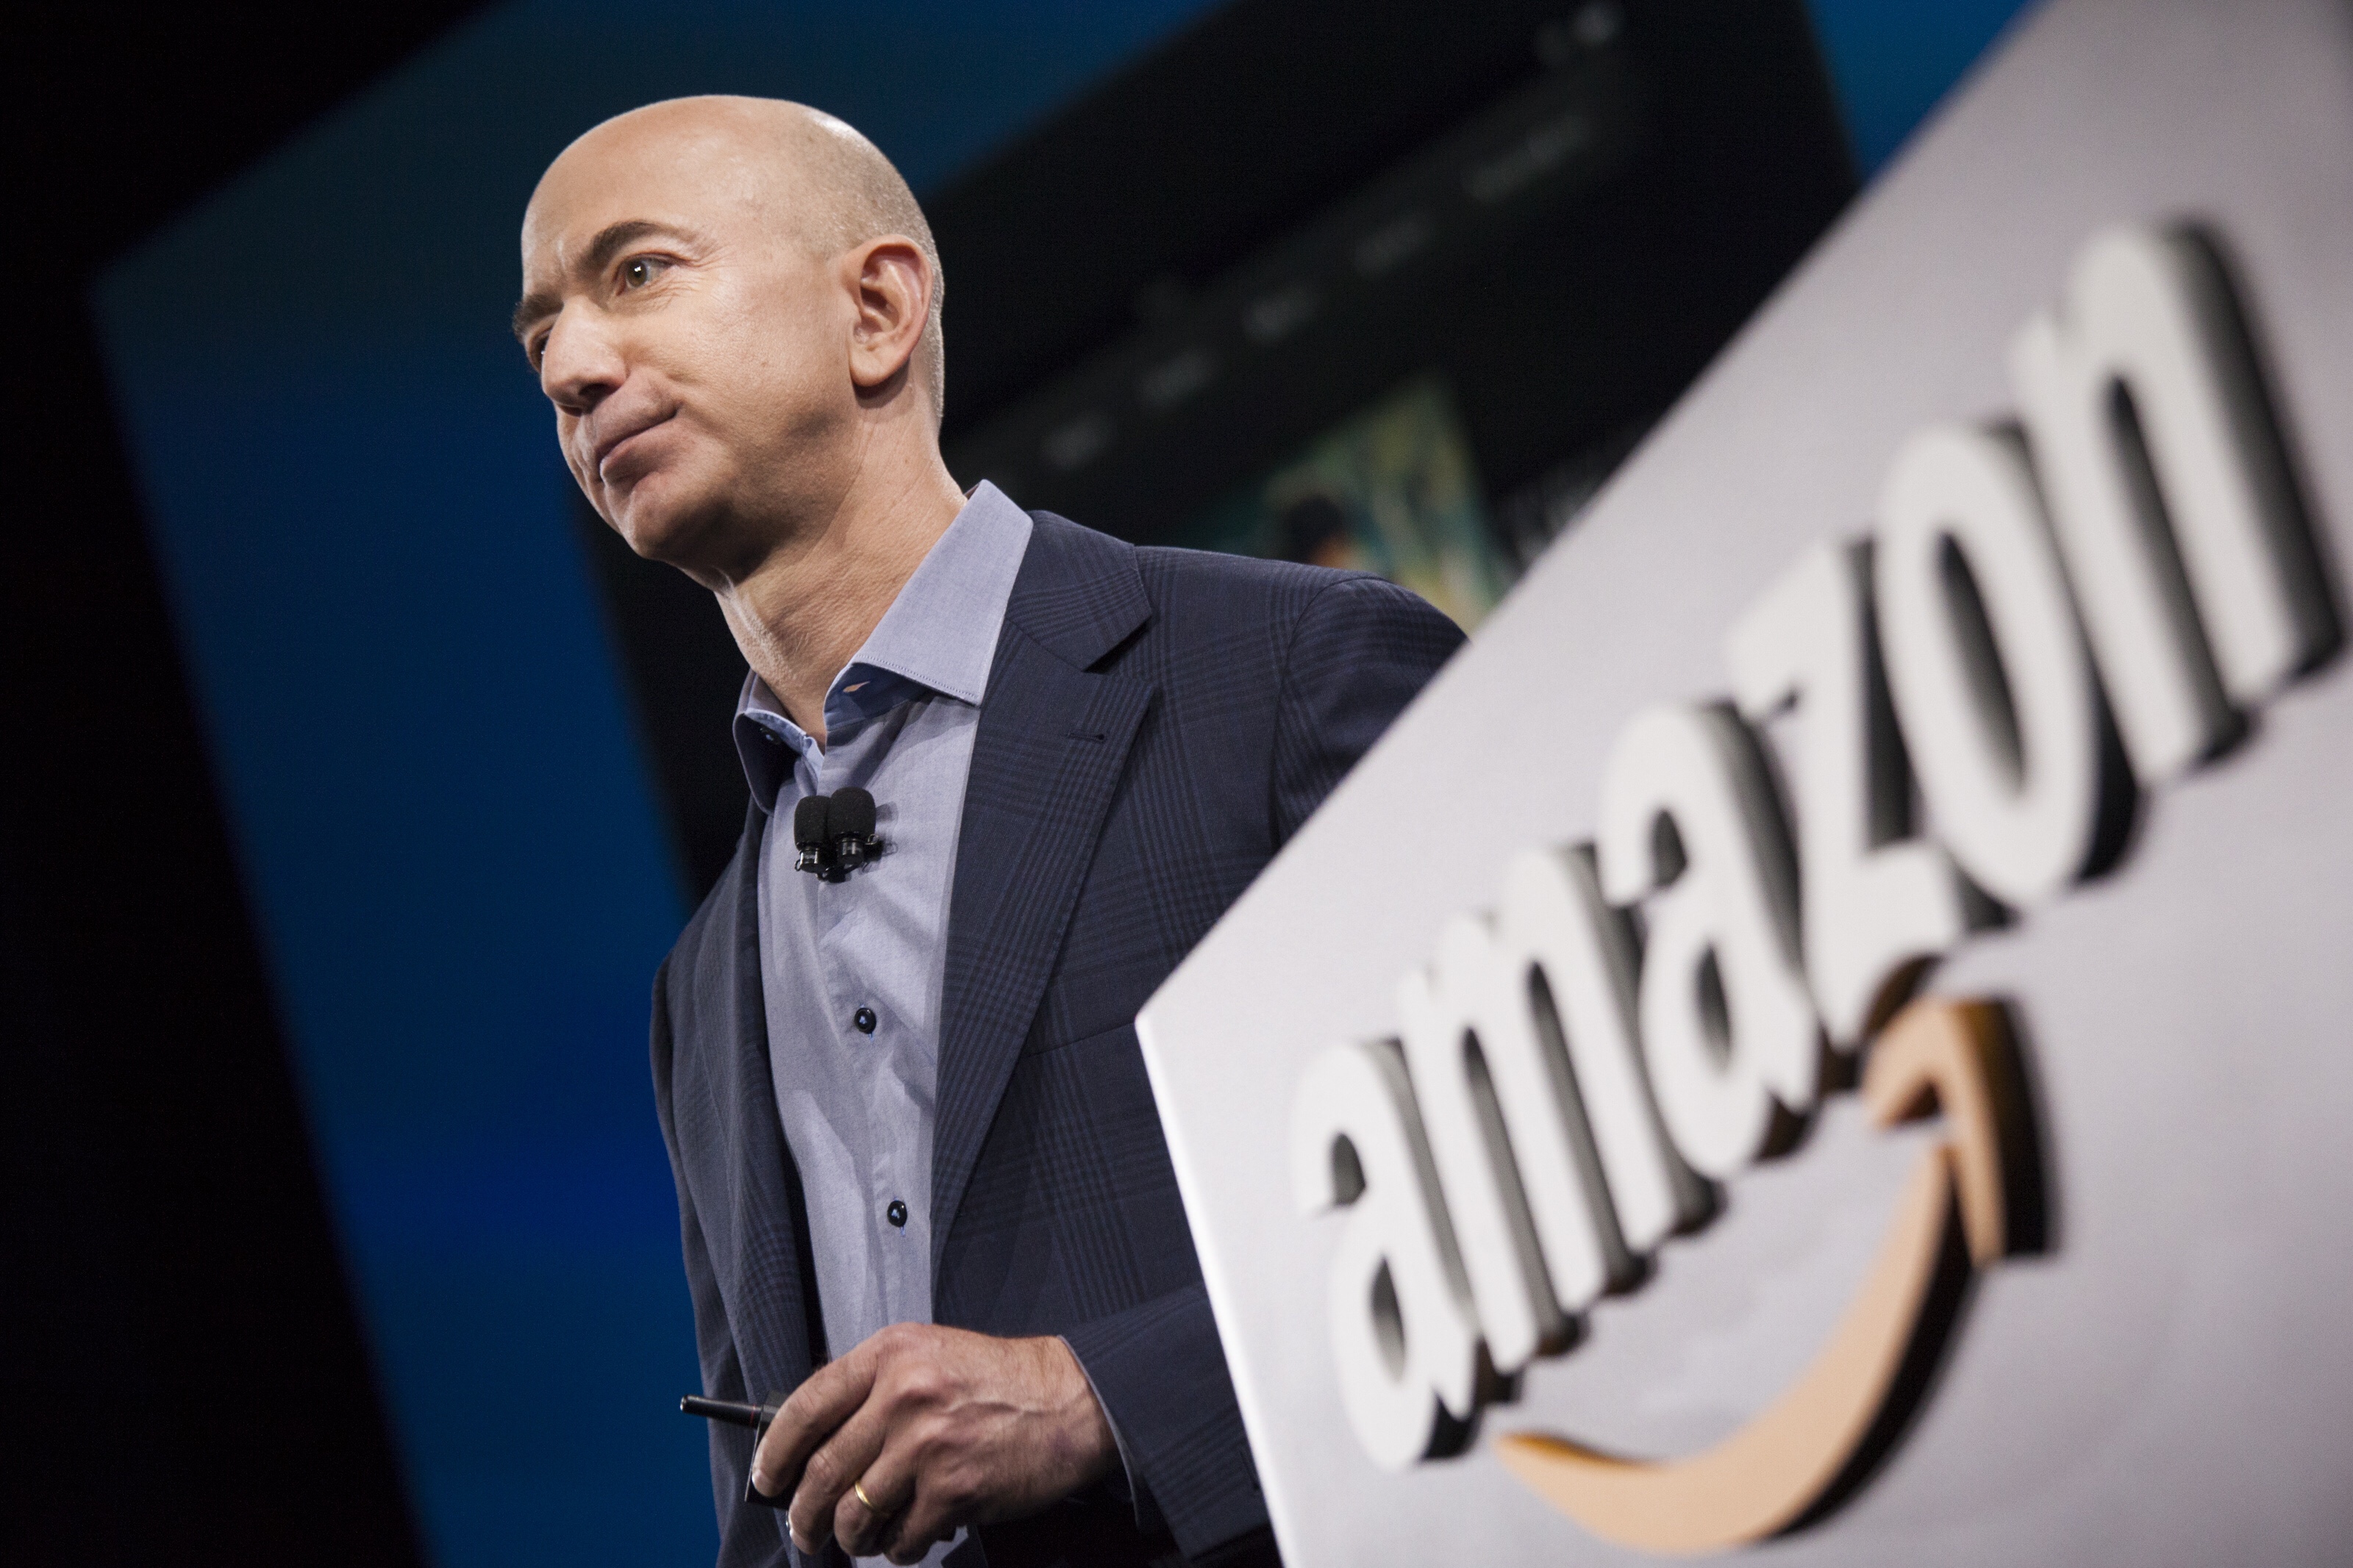 Amazon has passed Google to become second most valuable company in the US